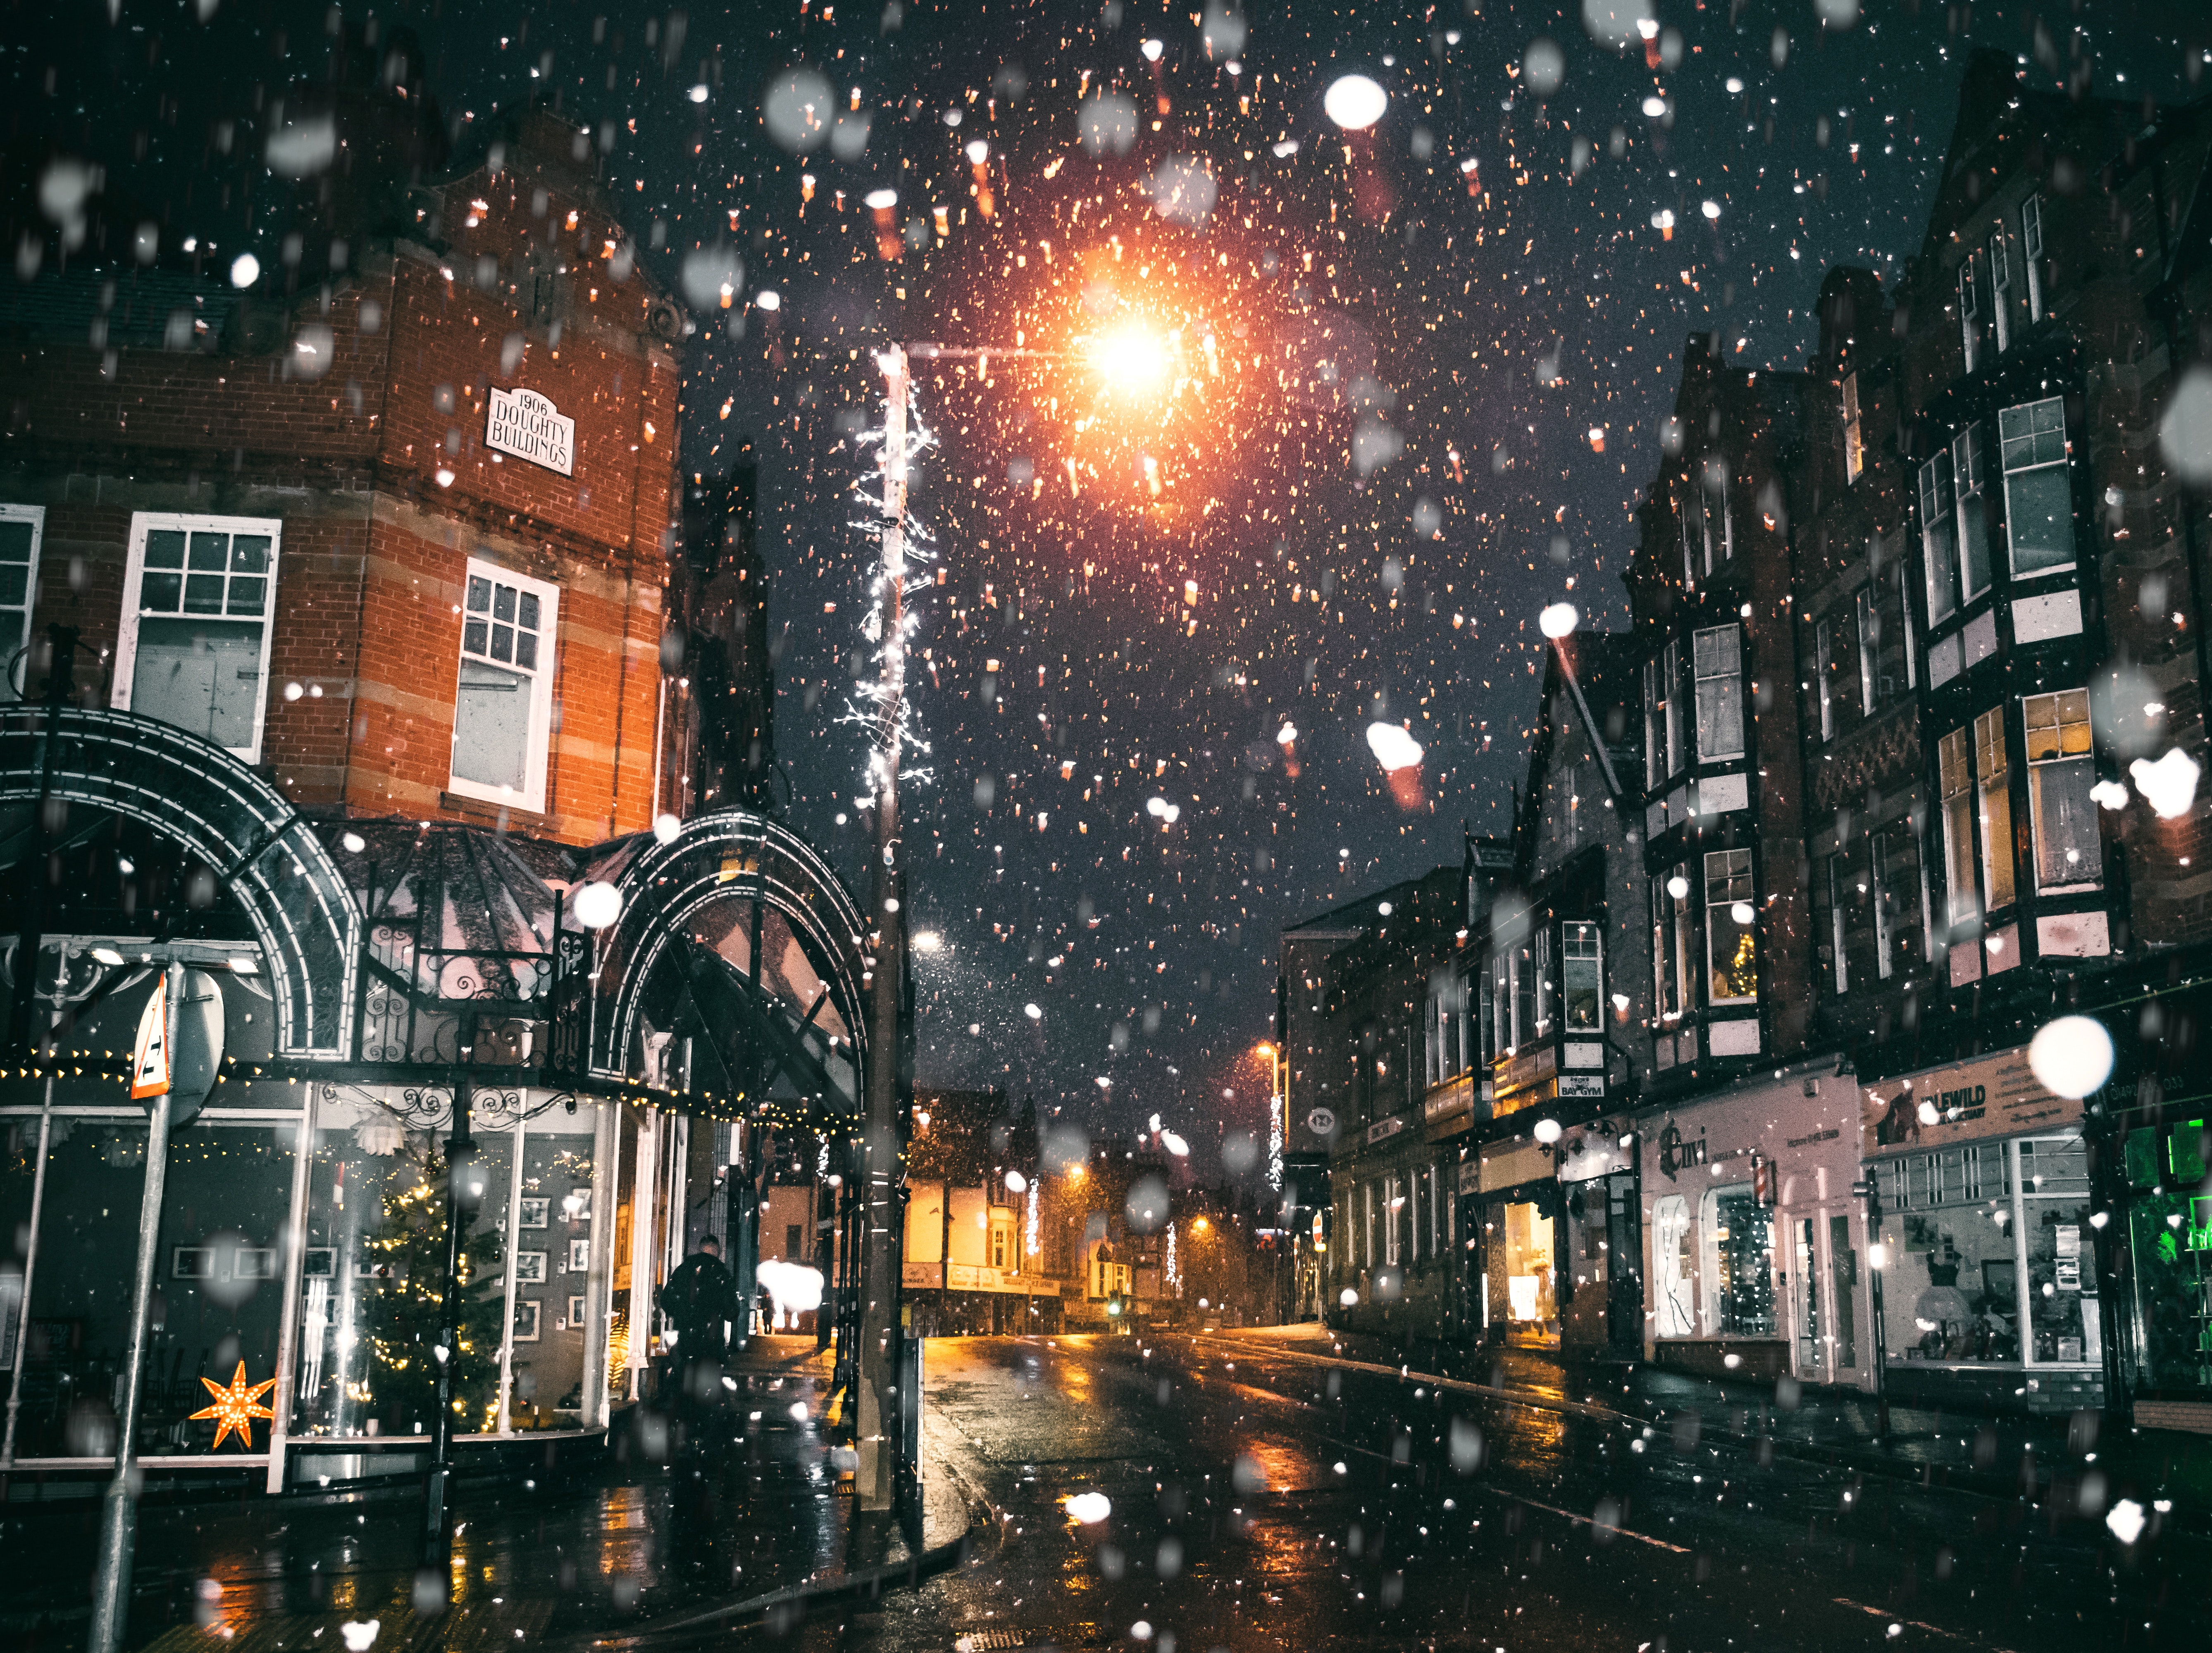 Rain of Snow in Town Painting, Architecture, Outdoors, Urban, Town, HQ Photo